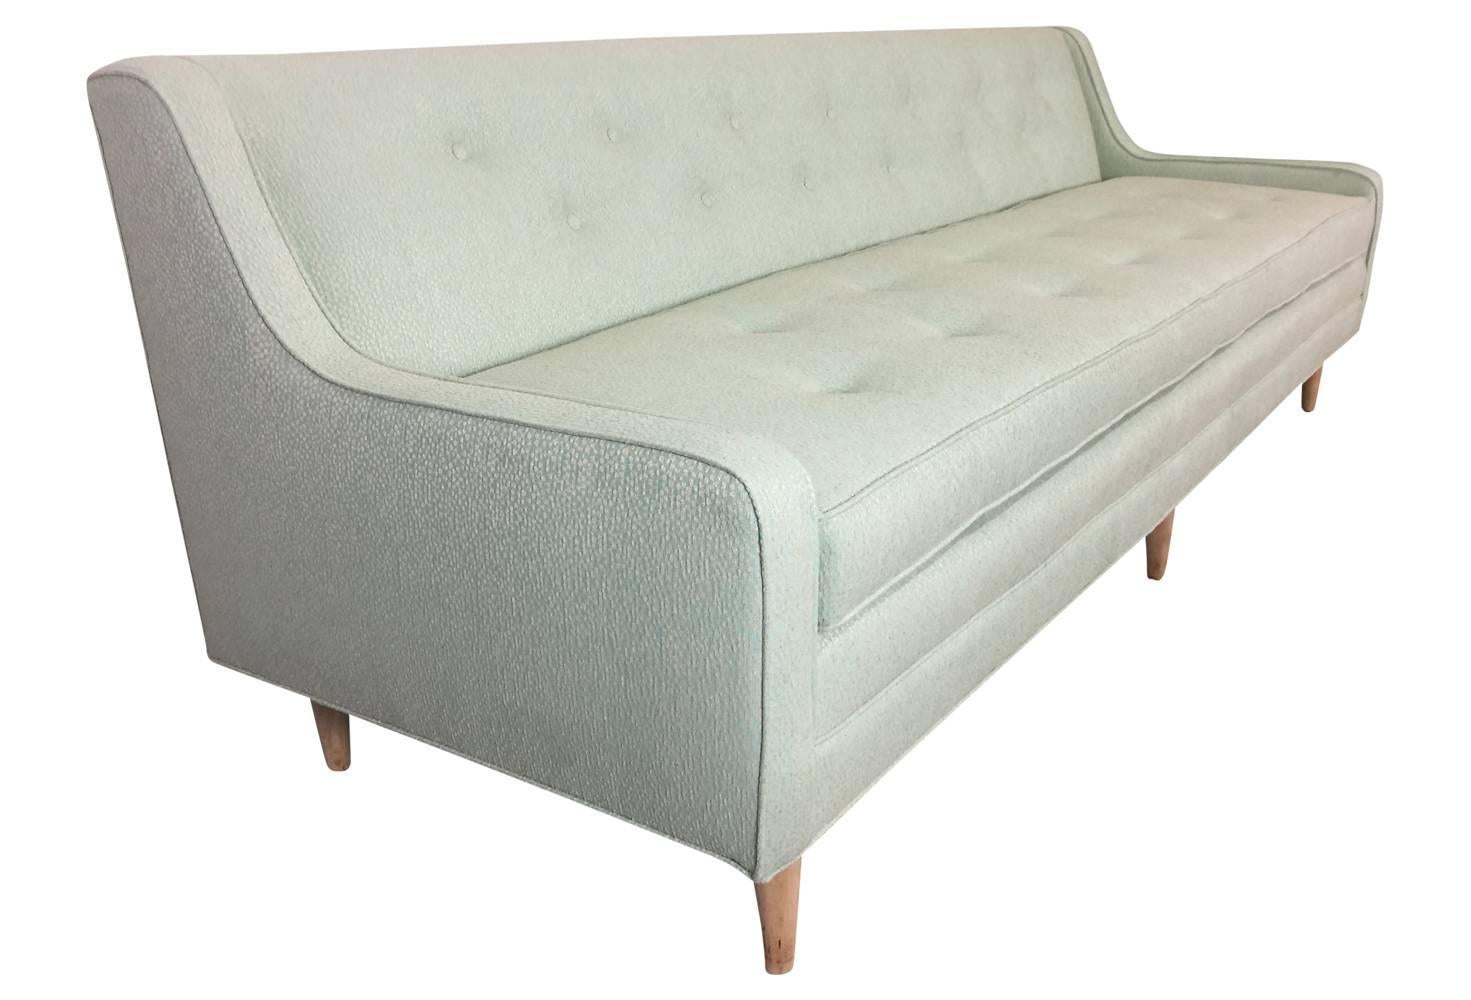 This gorgeous vintage Mid-Century Modern sofa has been lovingly restored. The upholstery is a lovely light green with cream 